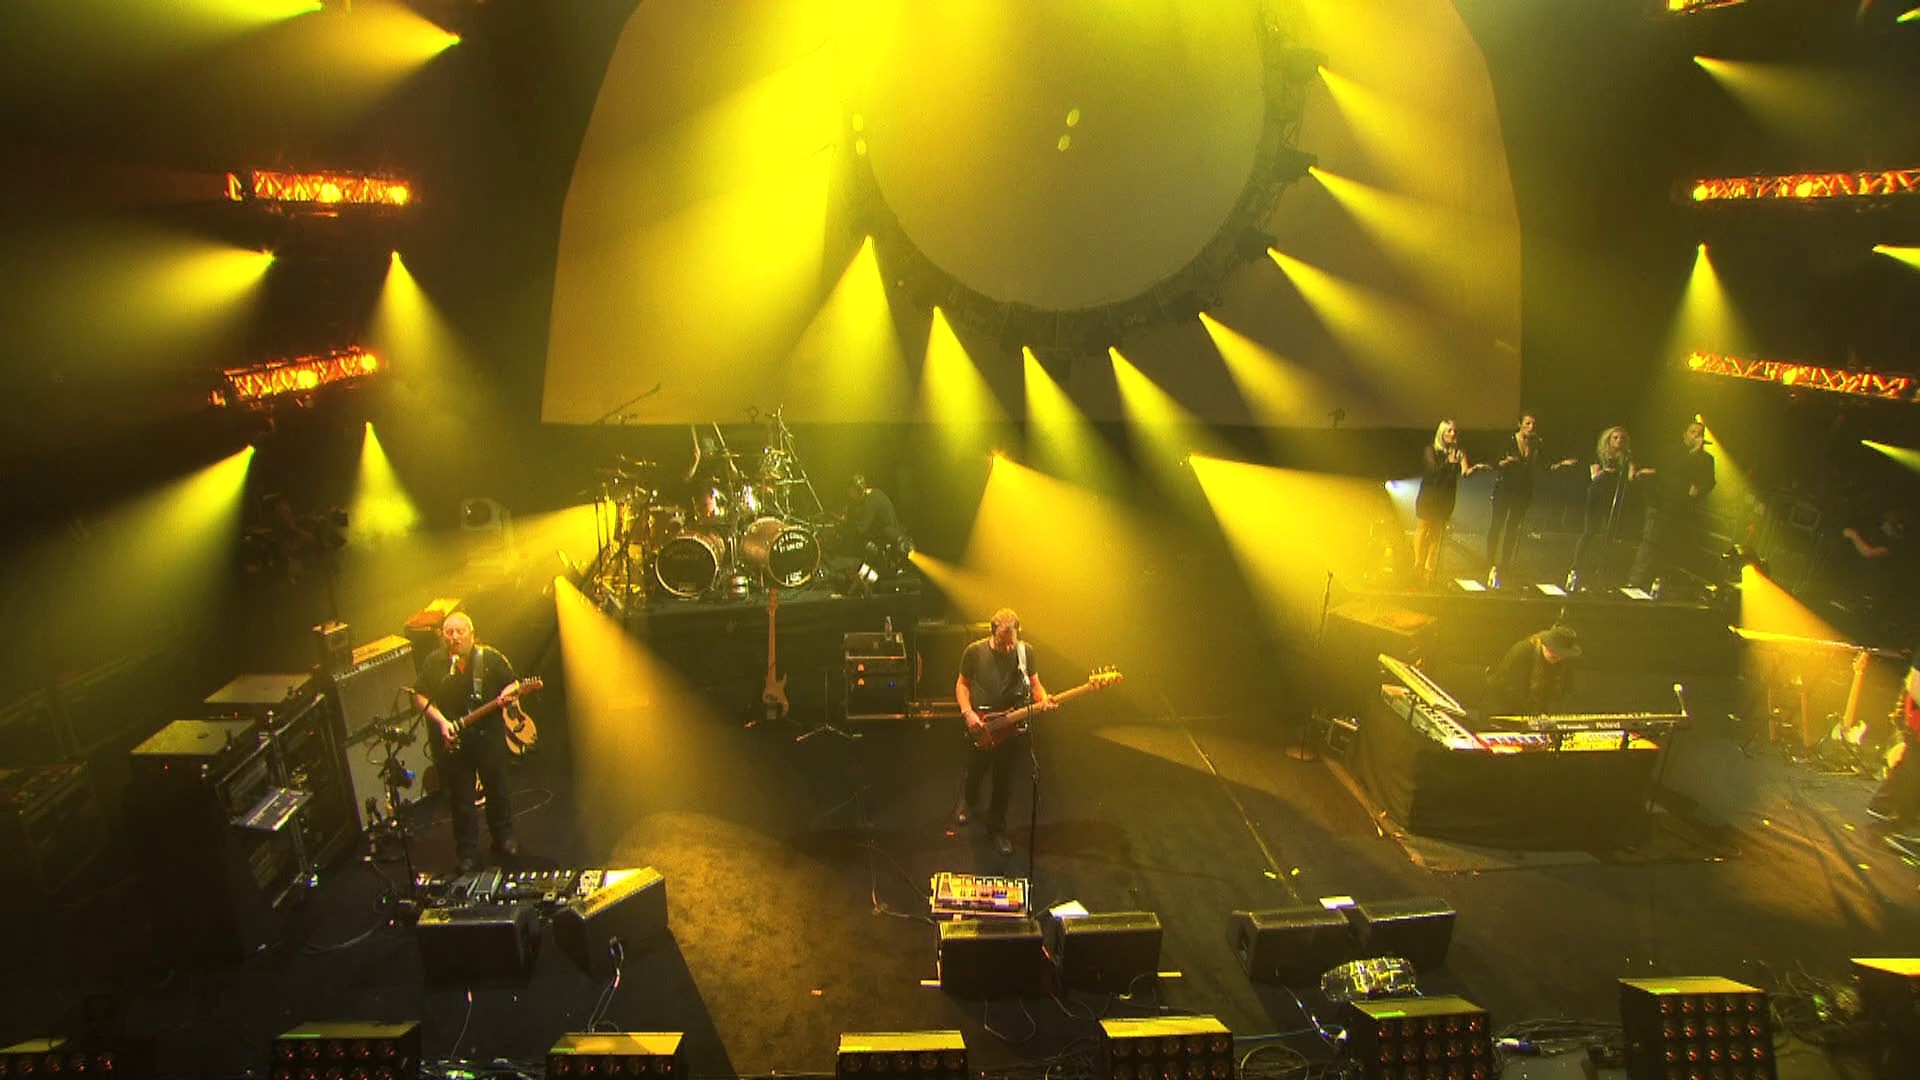 1920x1080 The Australian Pink Floyd Show - Live At The Hammersmith Apollo 2011 (2012)